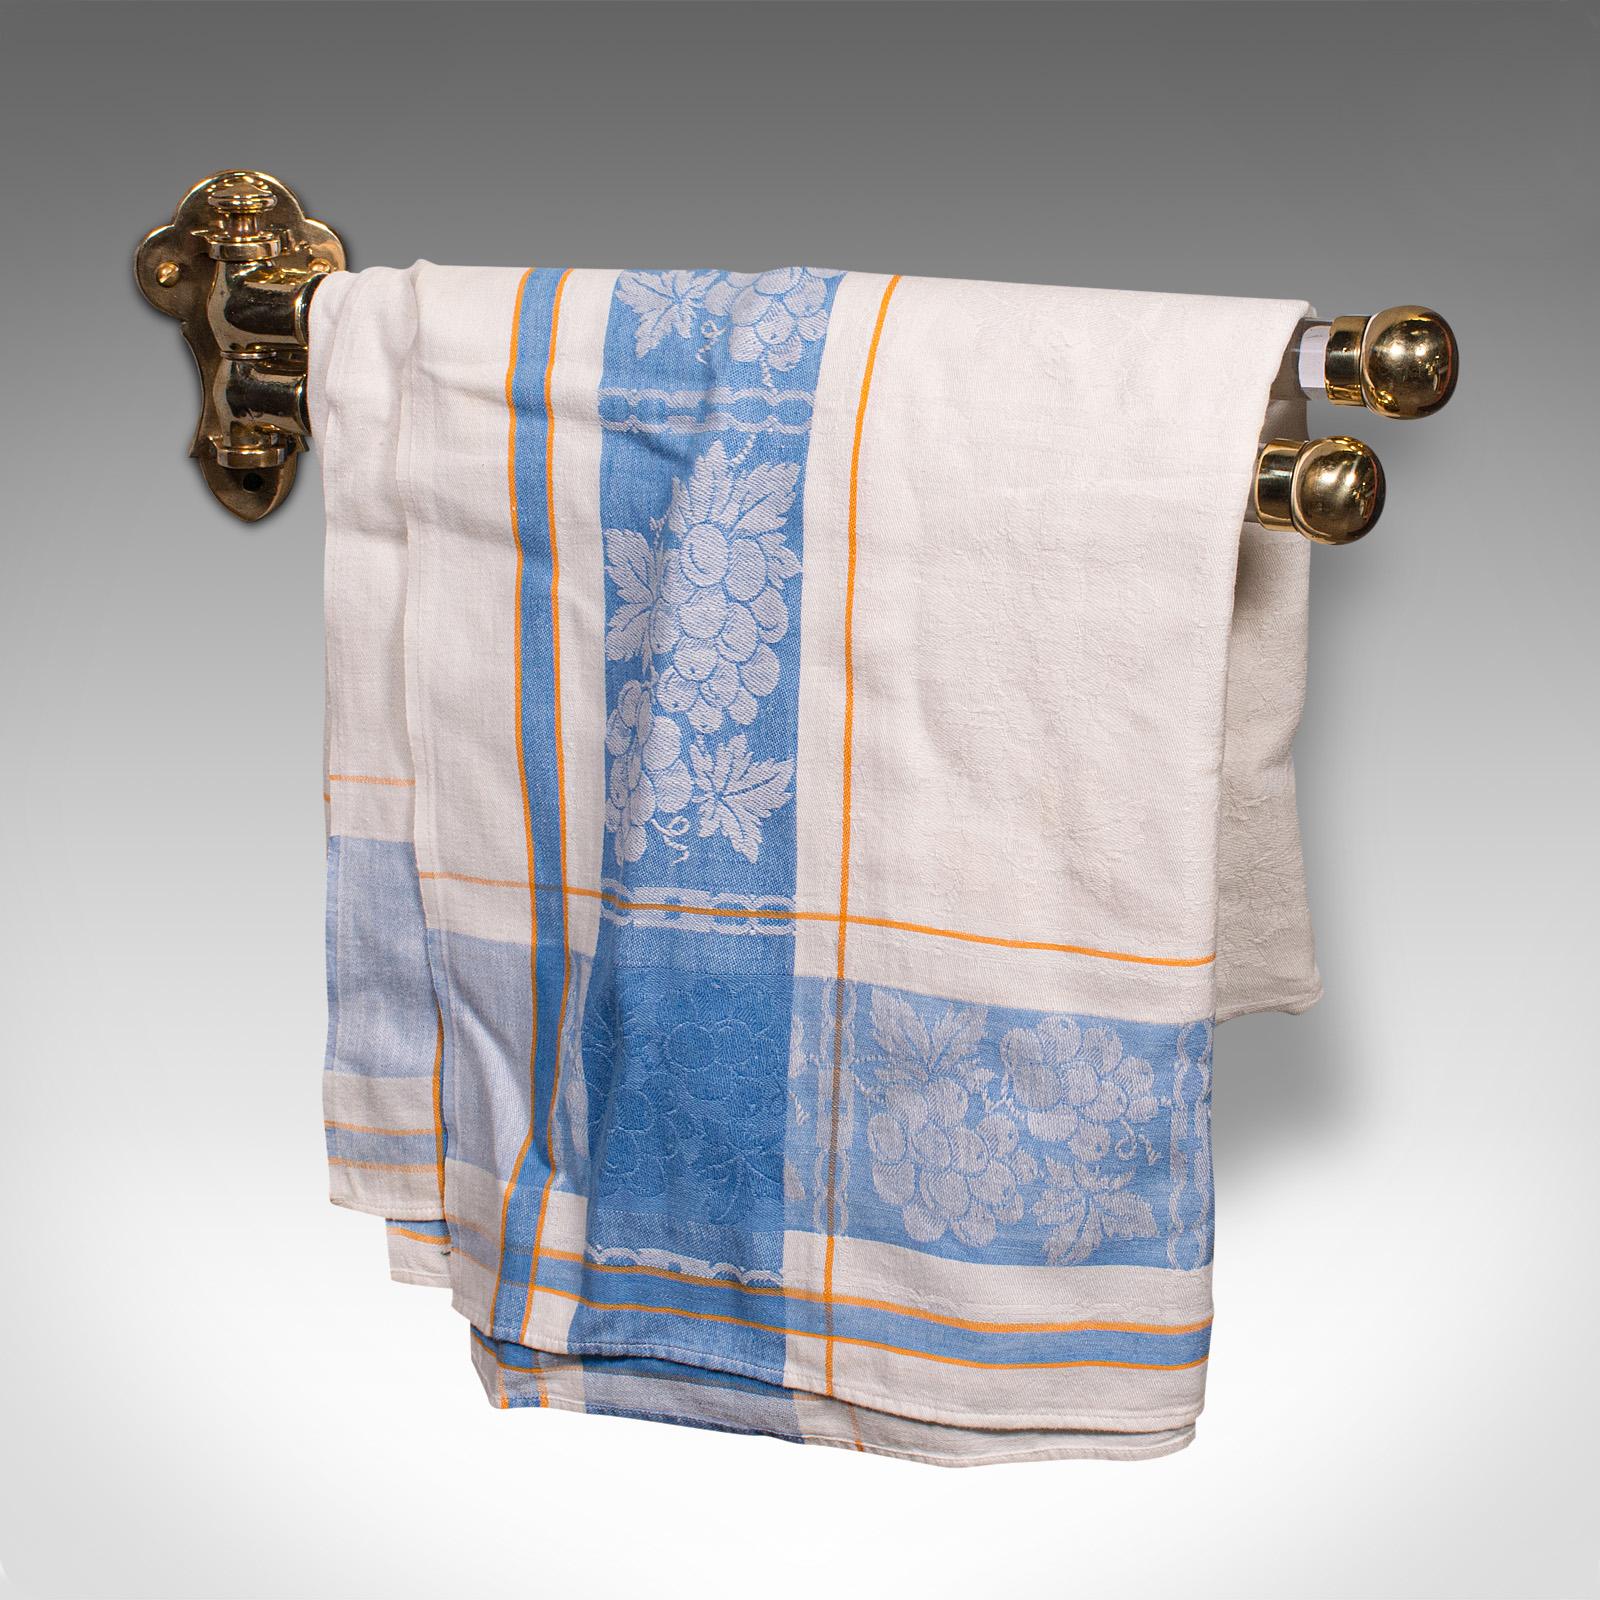 Antique Mounted Towel Rail, English, Brass, Glass, Scarf Rack, Victorian, C.1850 For Sale 2